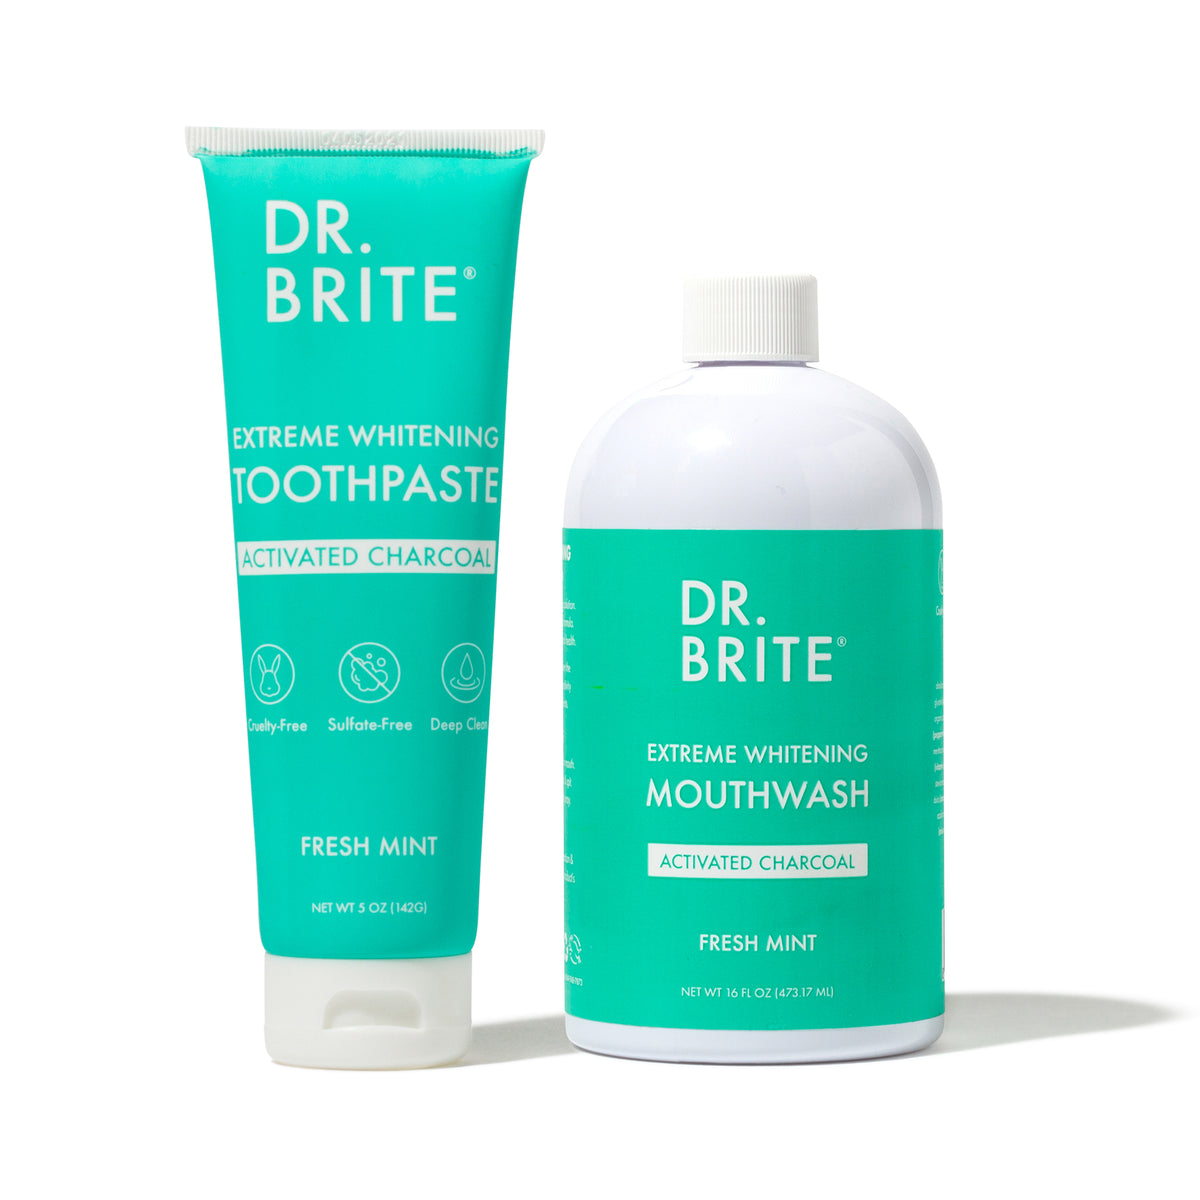 Extreme Teeth Whitening Toothpaste and Mouthwash - Duo